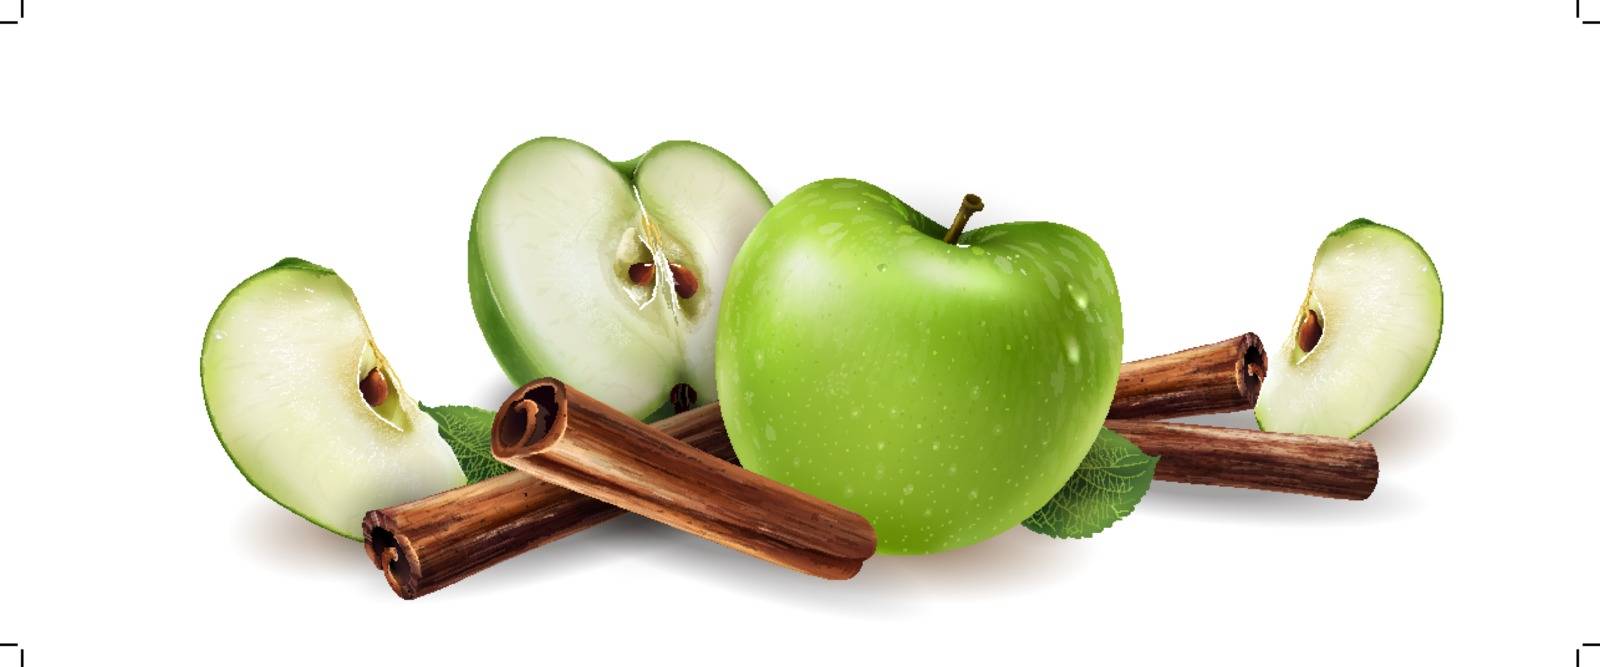 Cinnamon and green apples on a white background.